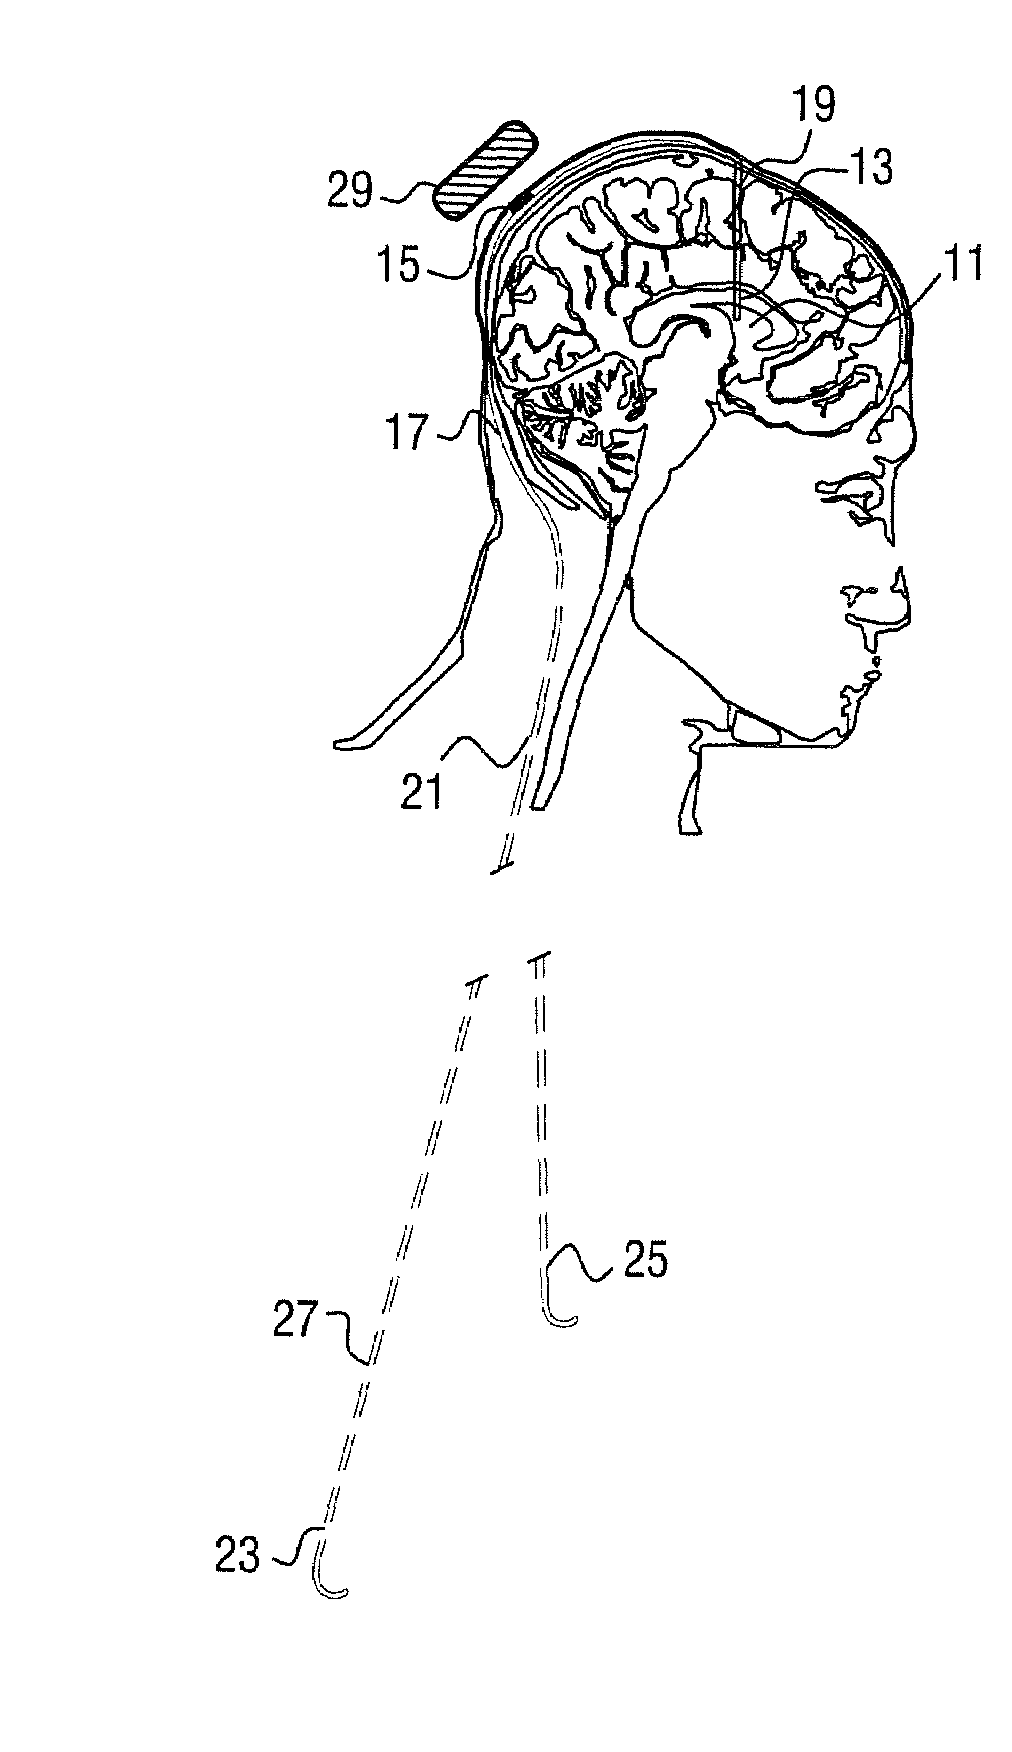 Electroactive polymer actuated cerebrospinal fluid shunt